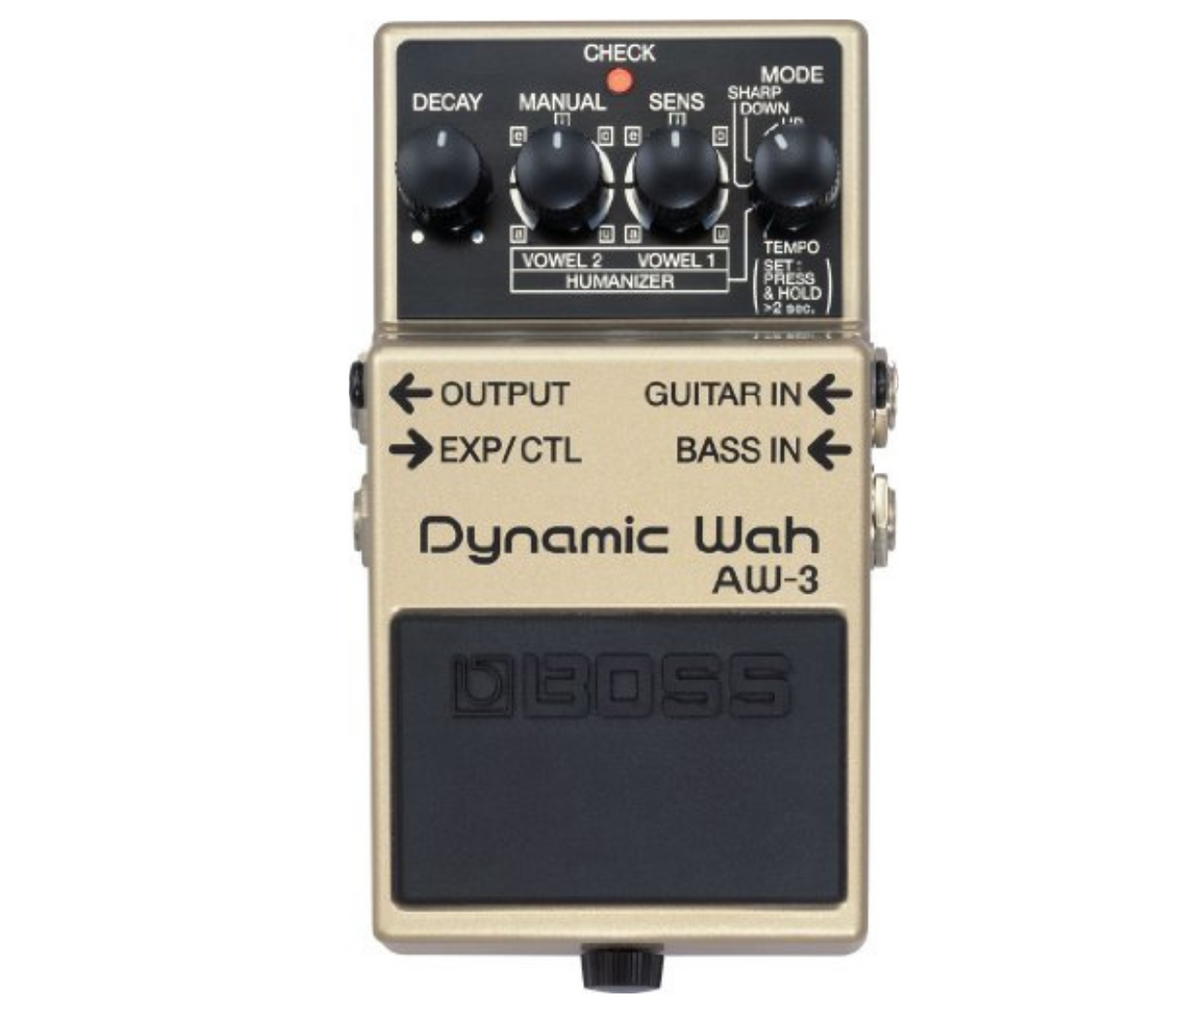 BOSS AW-3 Dynamic Wah Best Guitar Effects Pedal Dynamic Wah Effects and Humanizer Mode with Bass Input